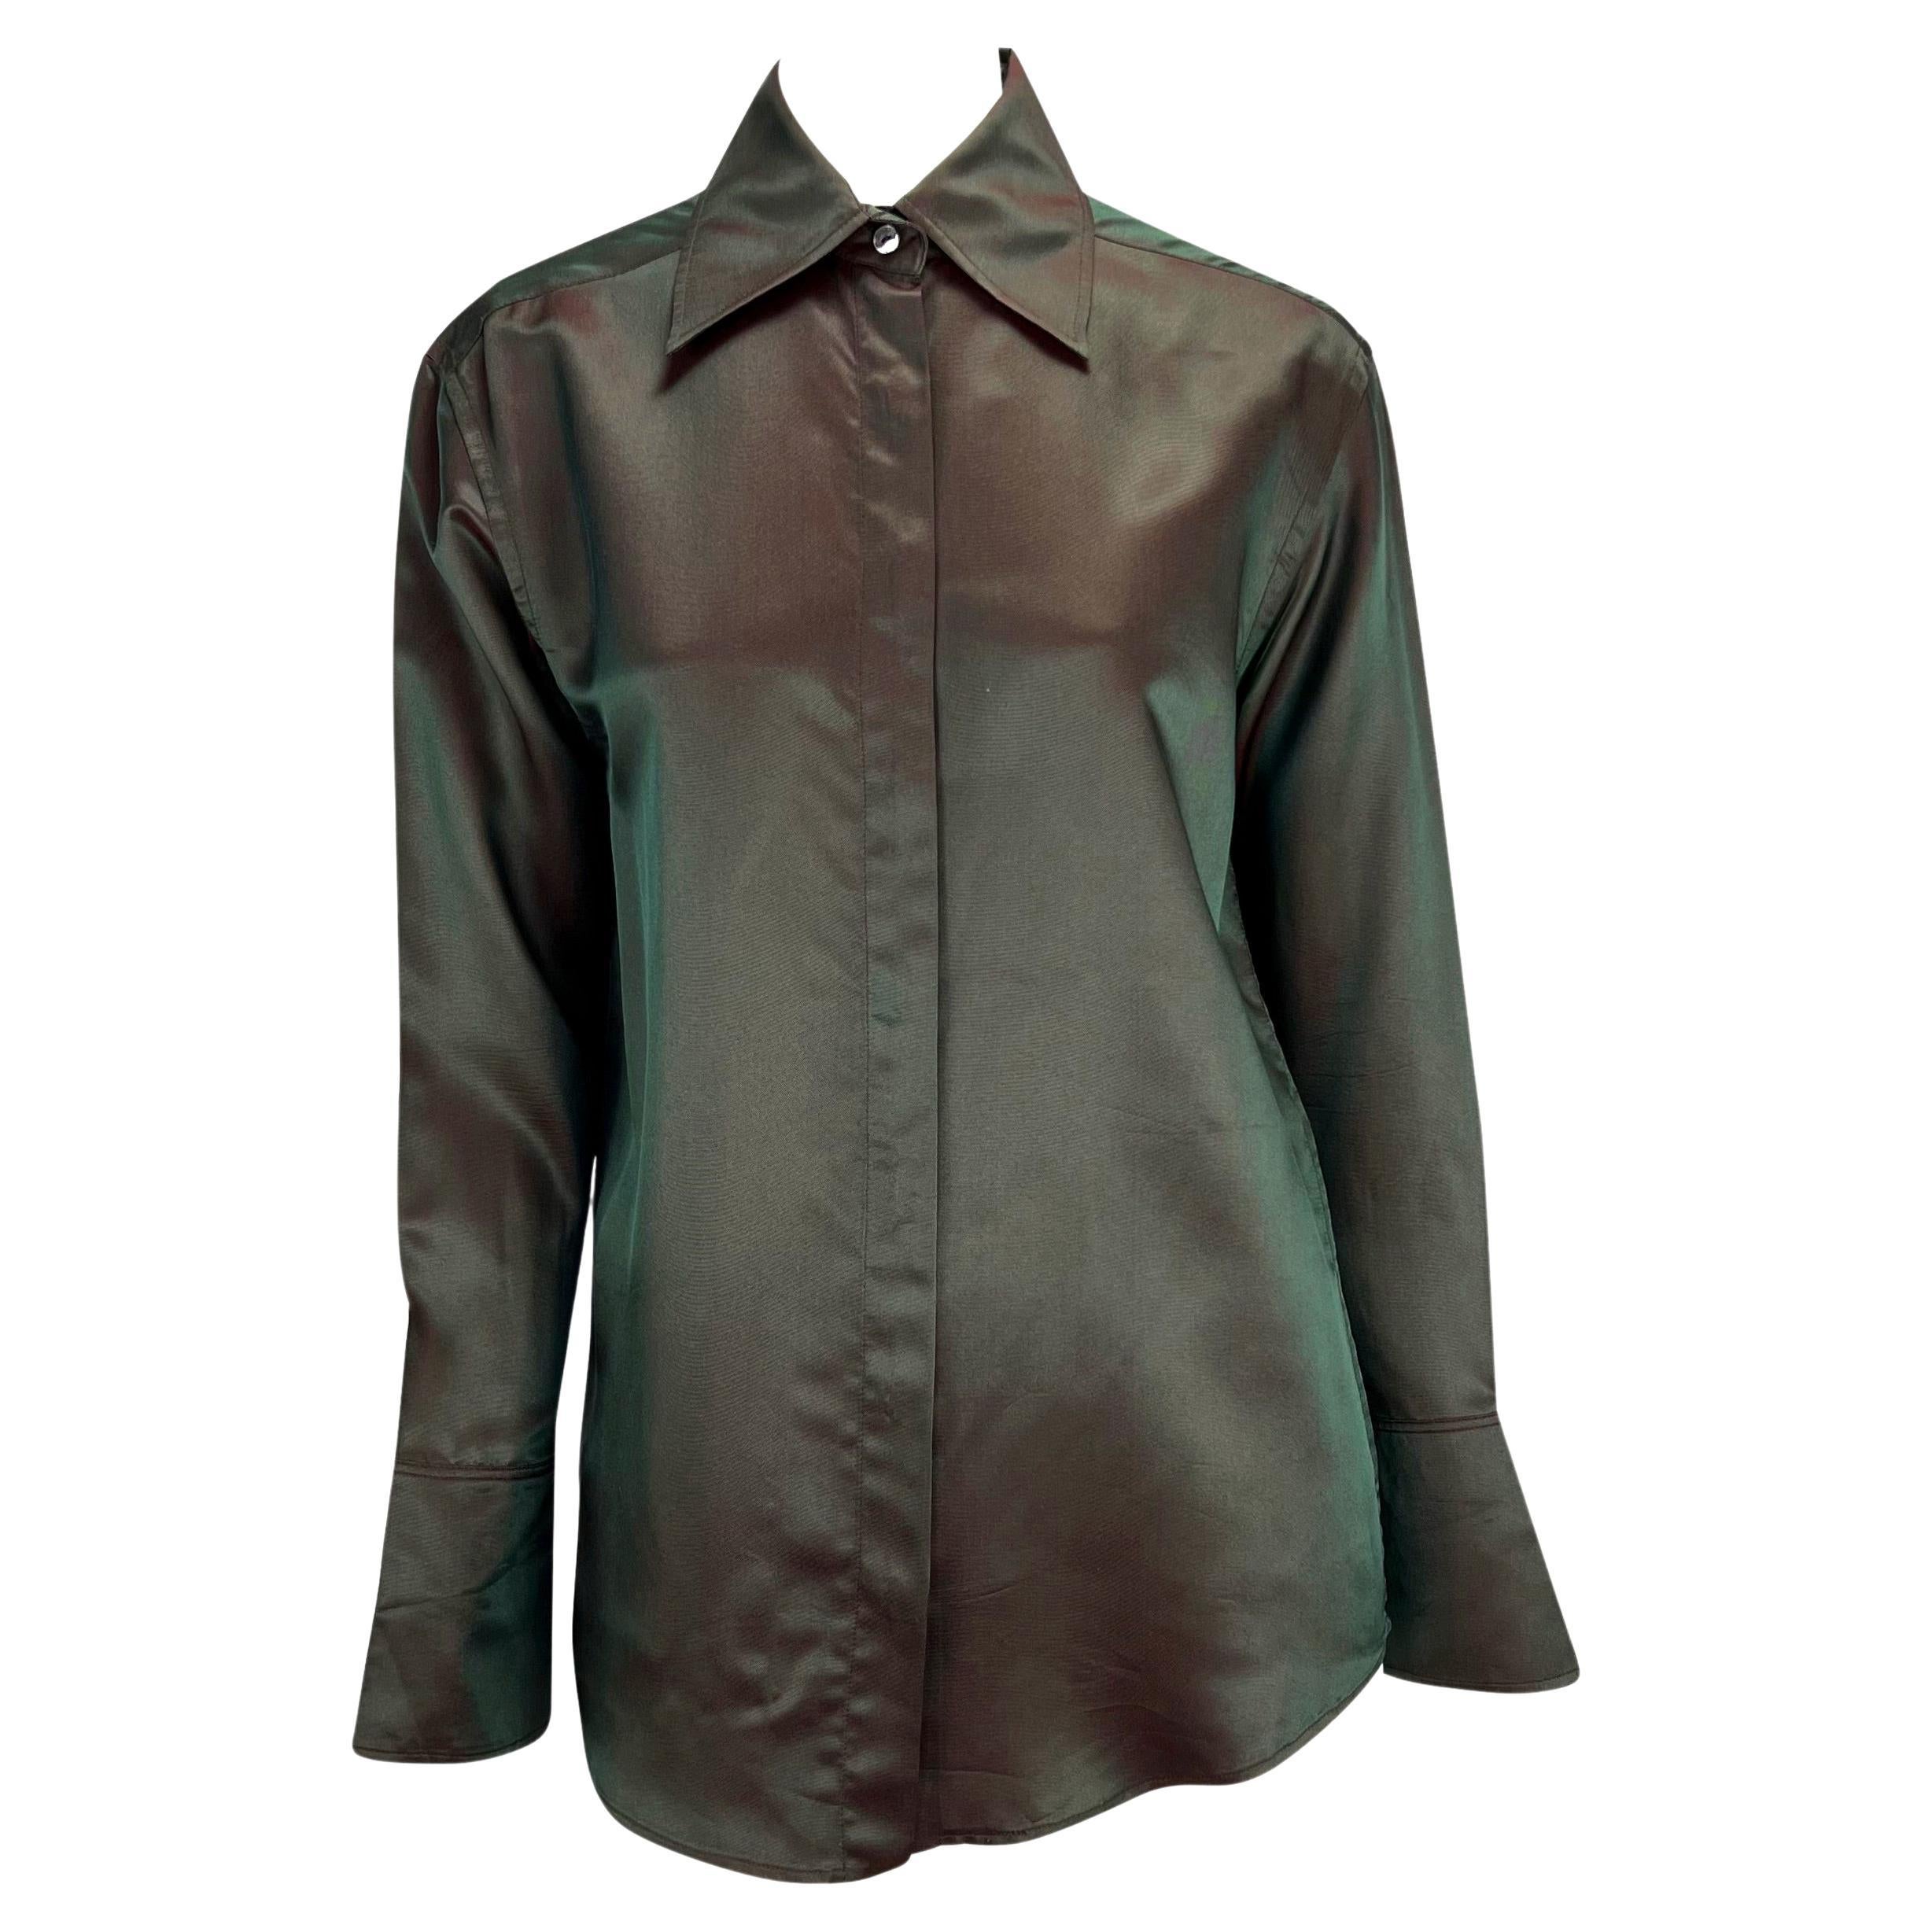 S/S 1998 Gucci by Tom Ford Runway Grey Red Iridescent Button Up Top